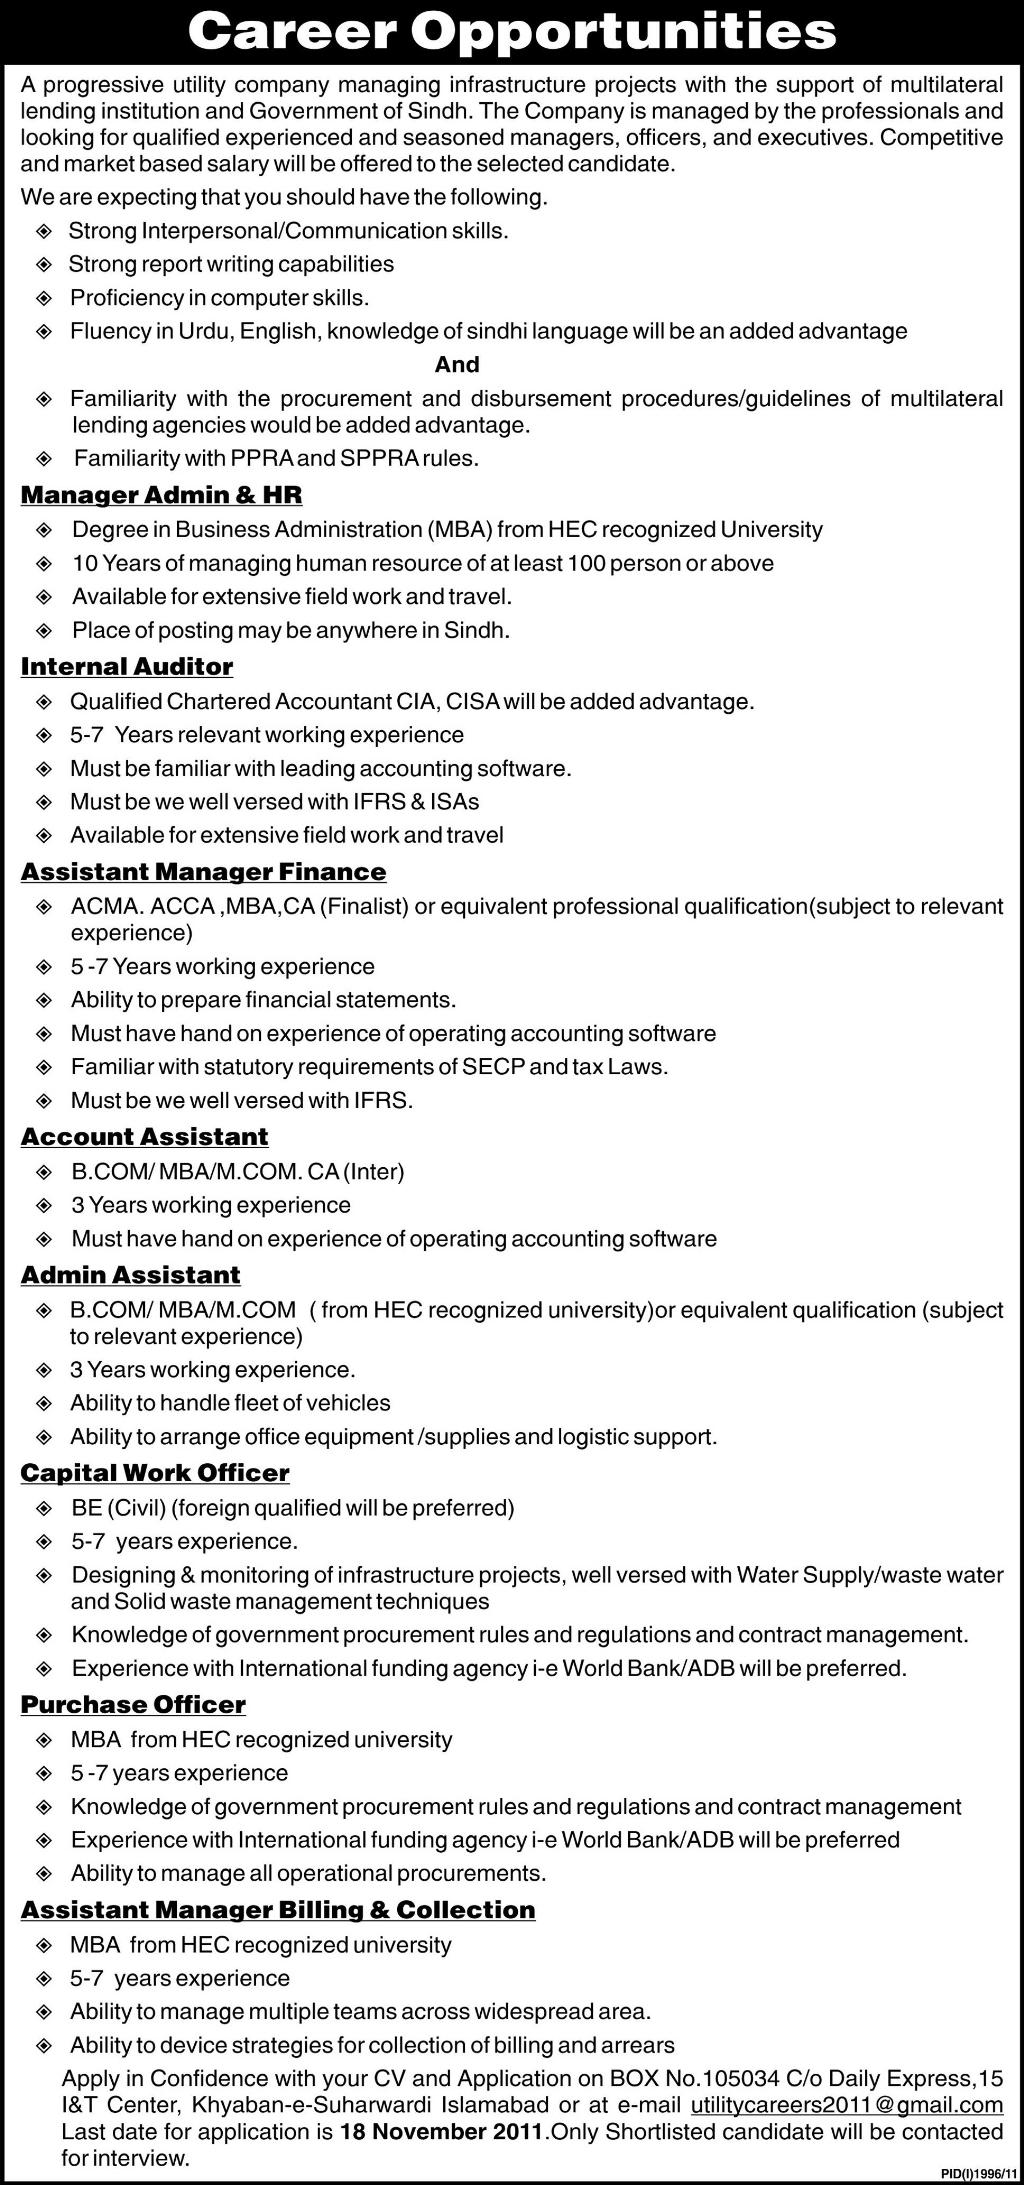 Managers and Officers Required by a Utility Company